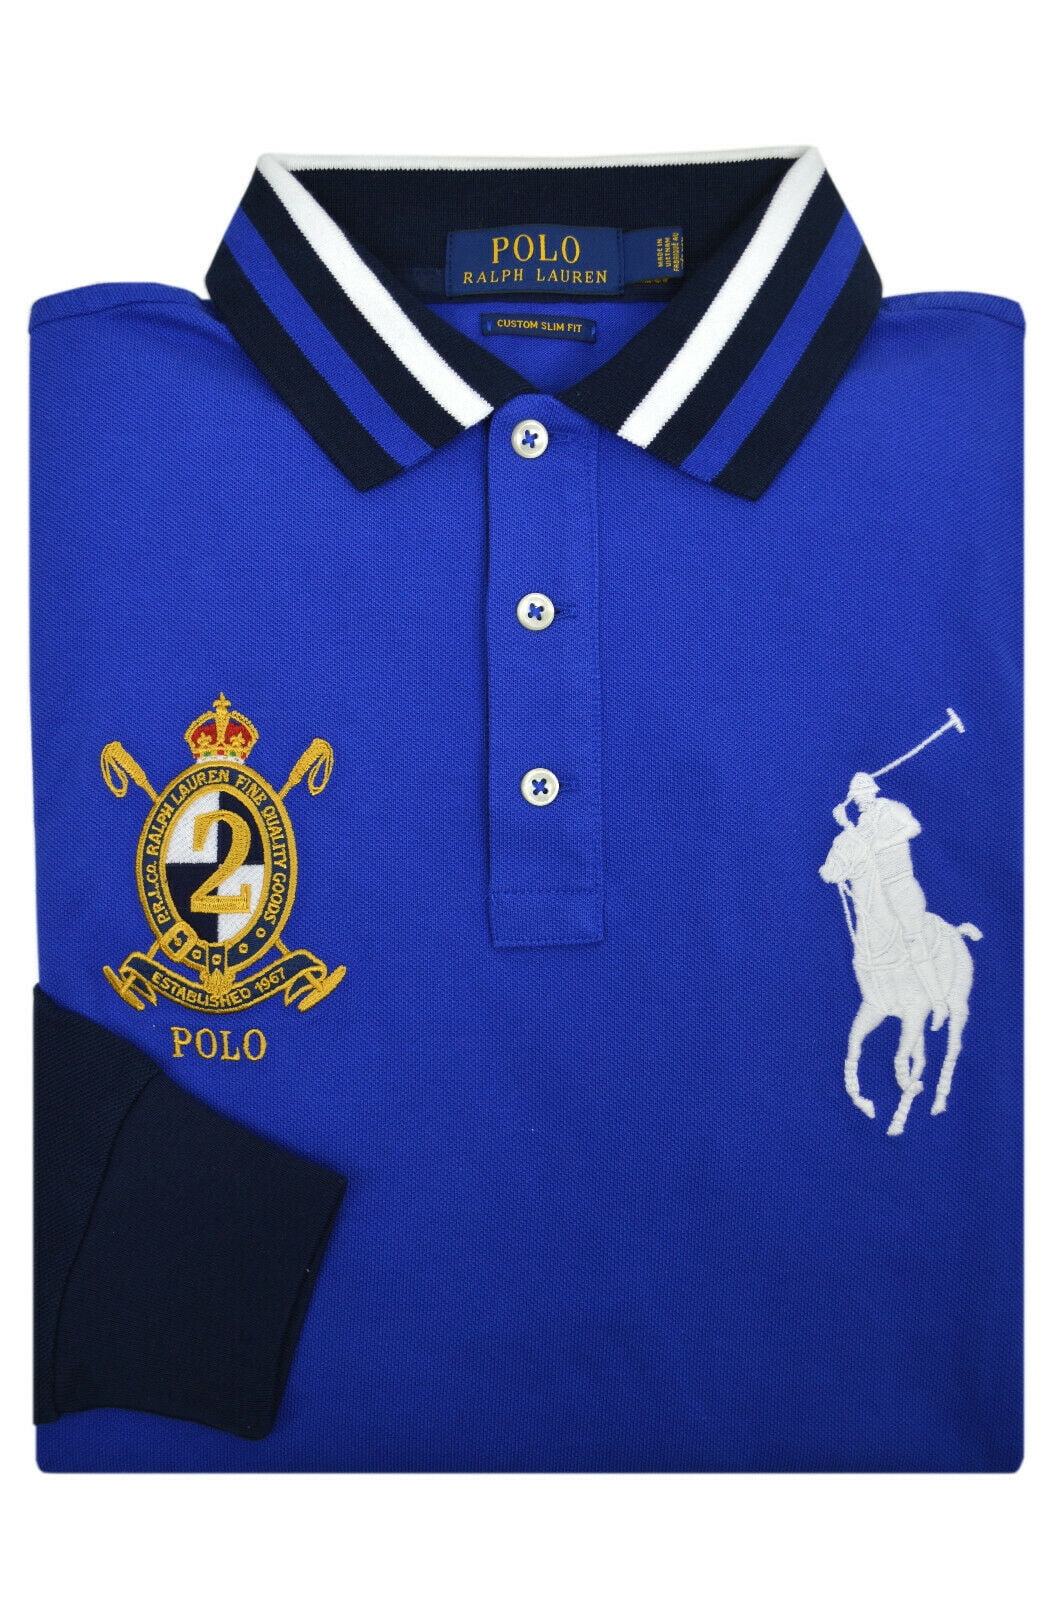 POLO FOR MEN BY RALPH LAUREN (Original) (M) [Type*] : Oil (Woody Chypre  31187